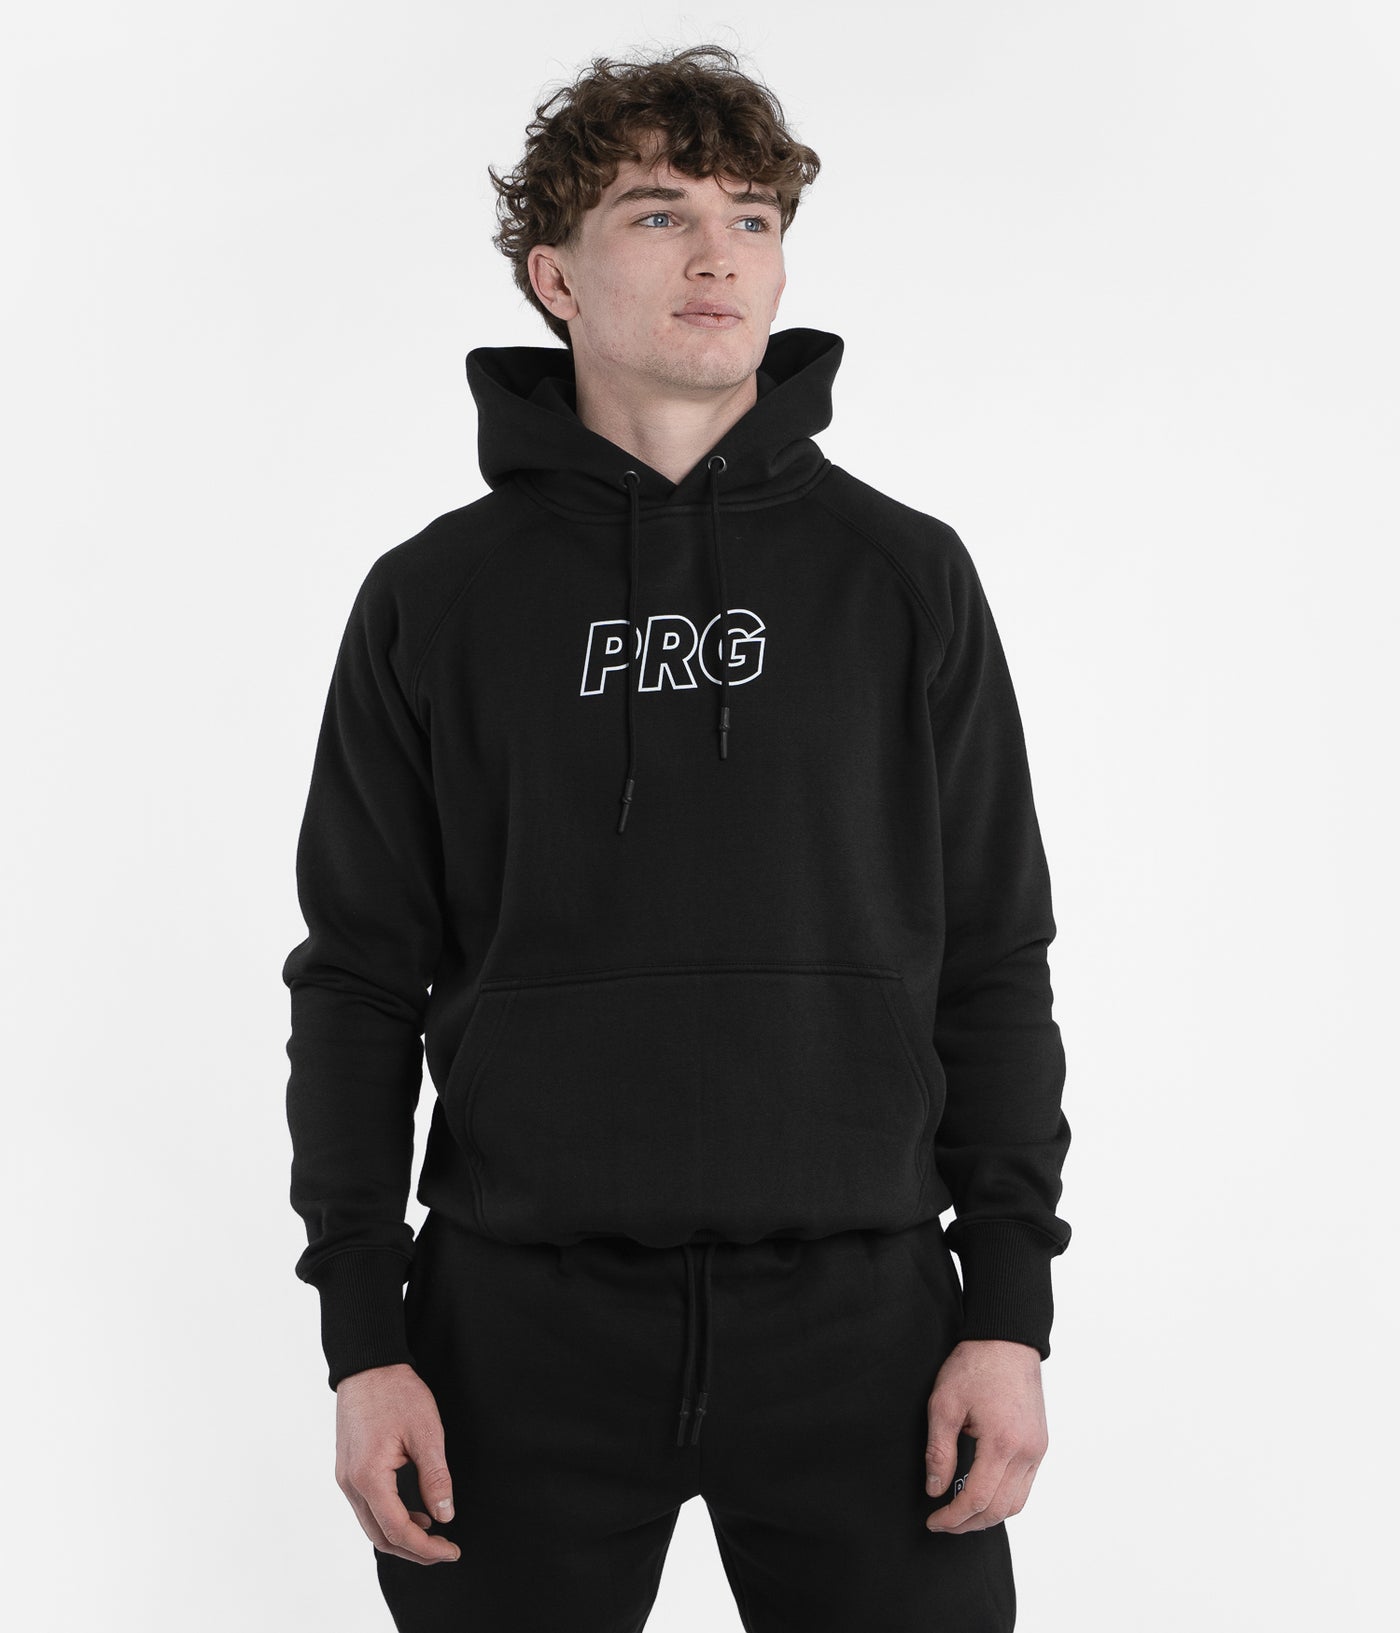 What makes the PRG Hoodie special?